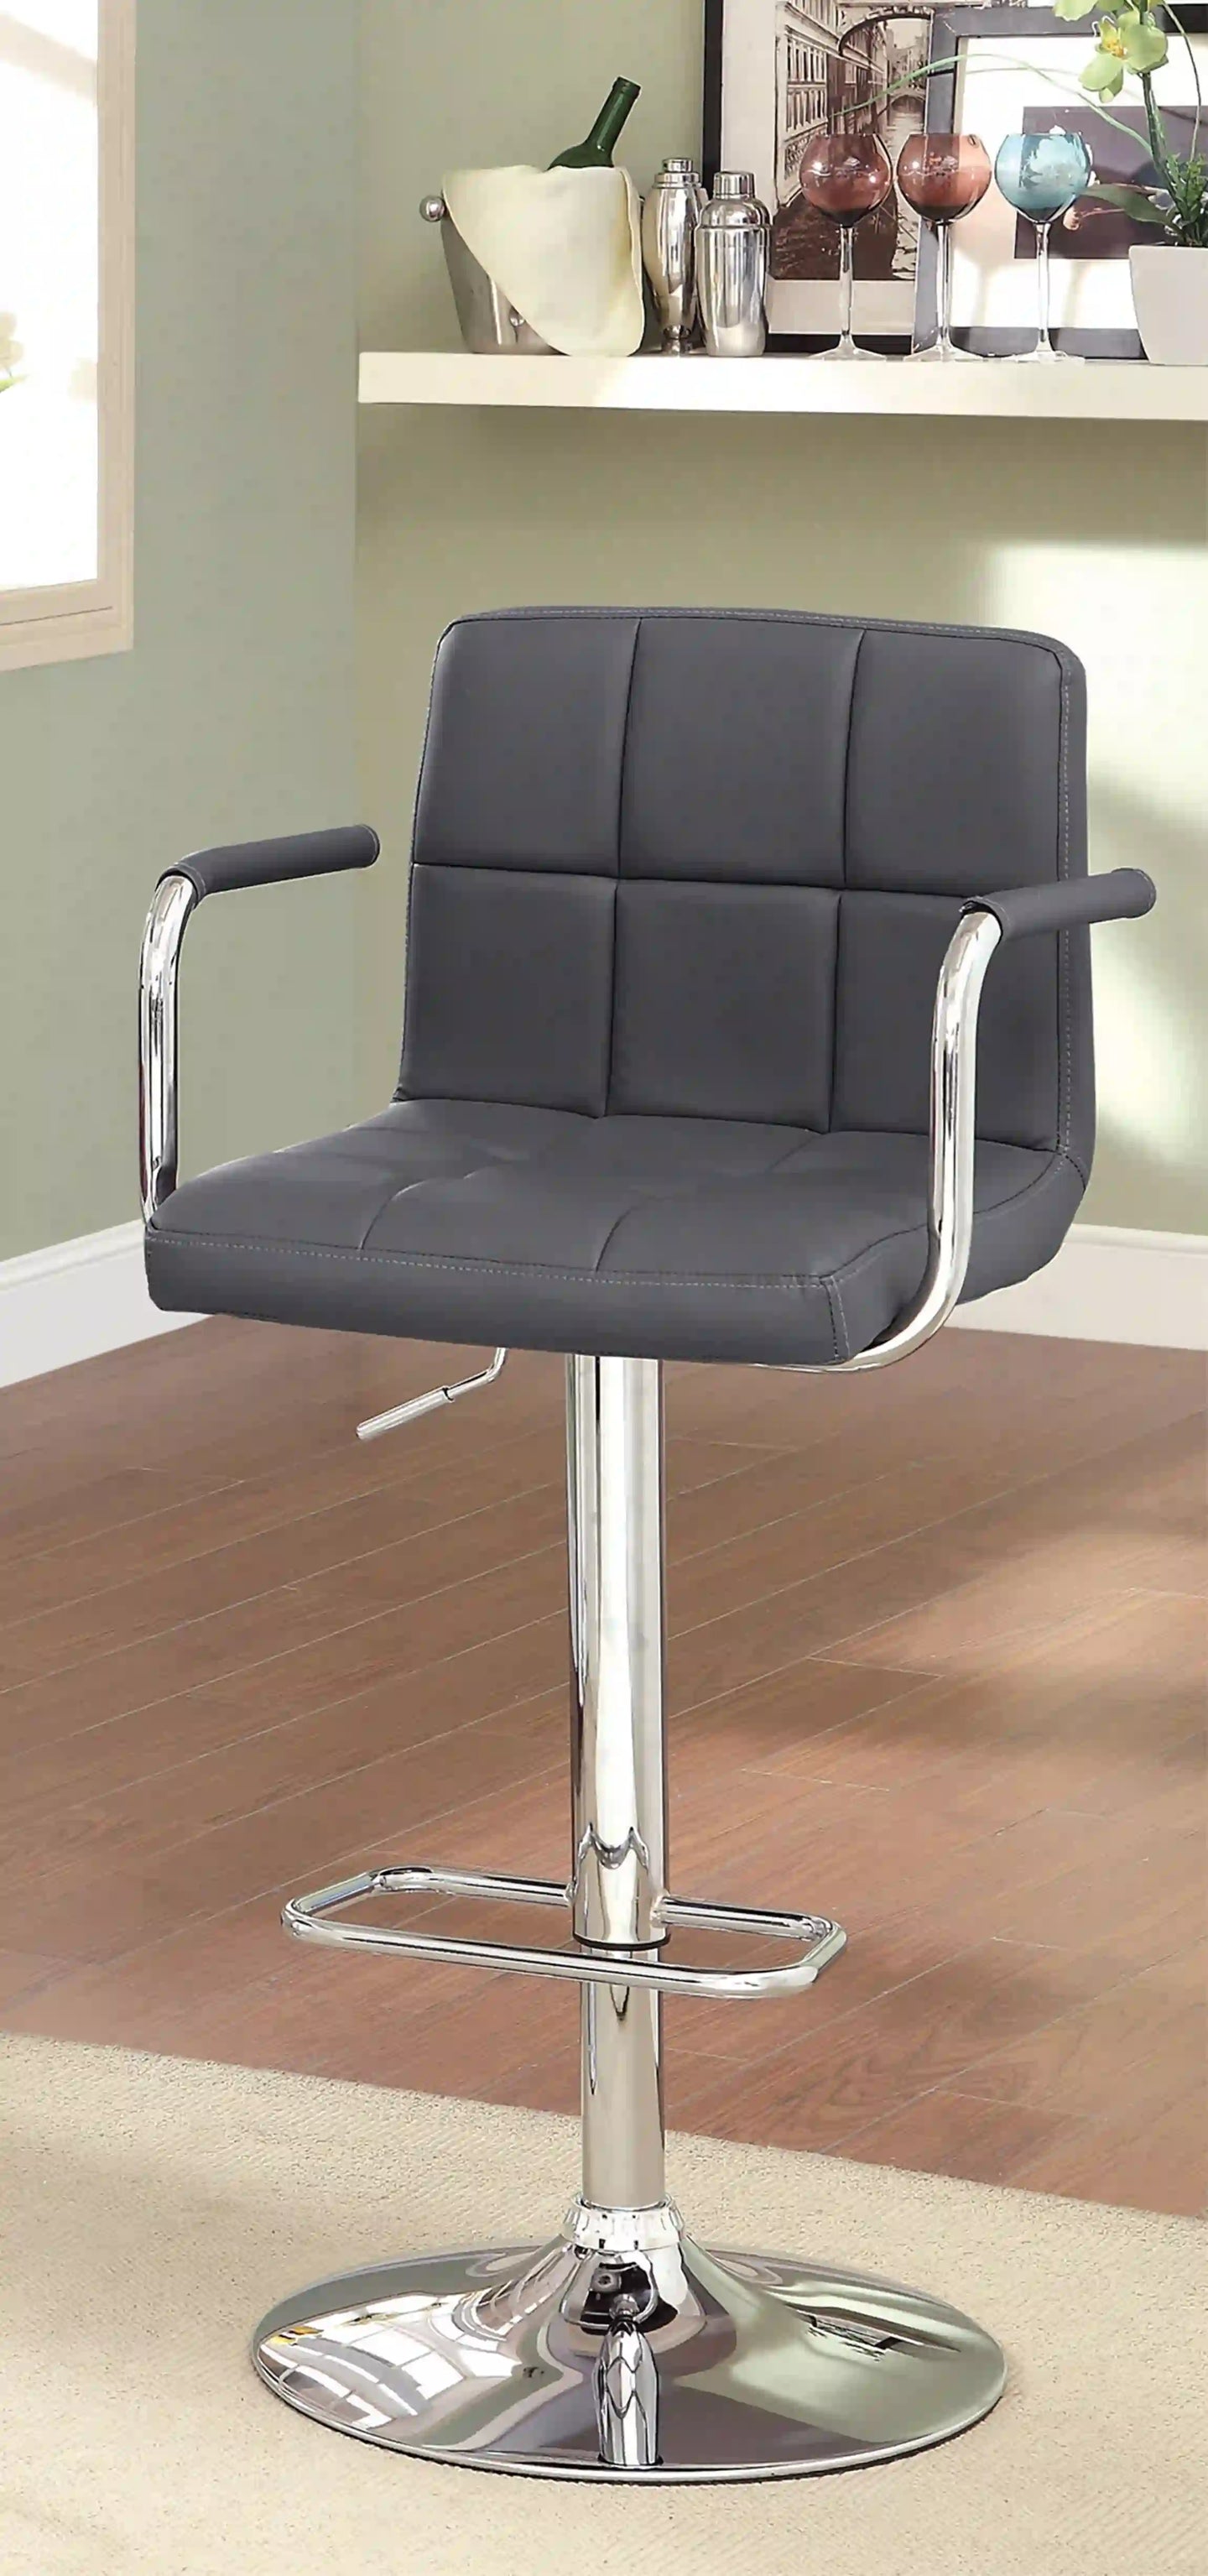 Furniture of America Witmer Contemporary Height Adjustable Bar Stool in Gray - IDF-BR6917GY